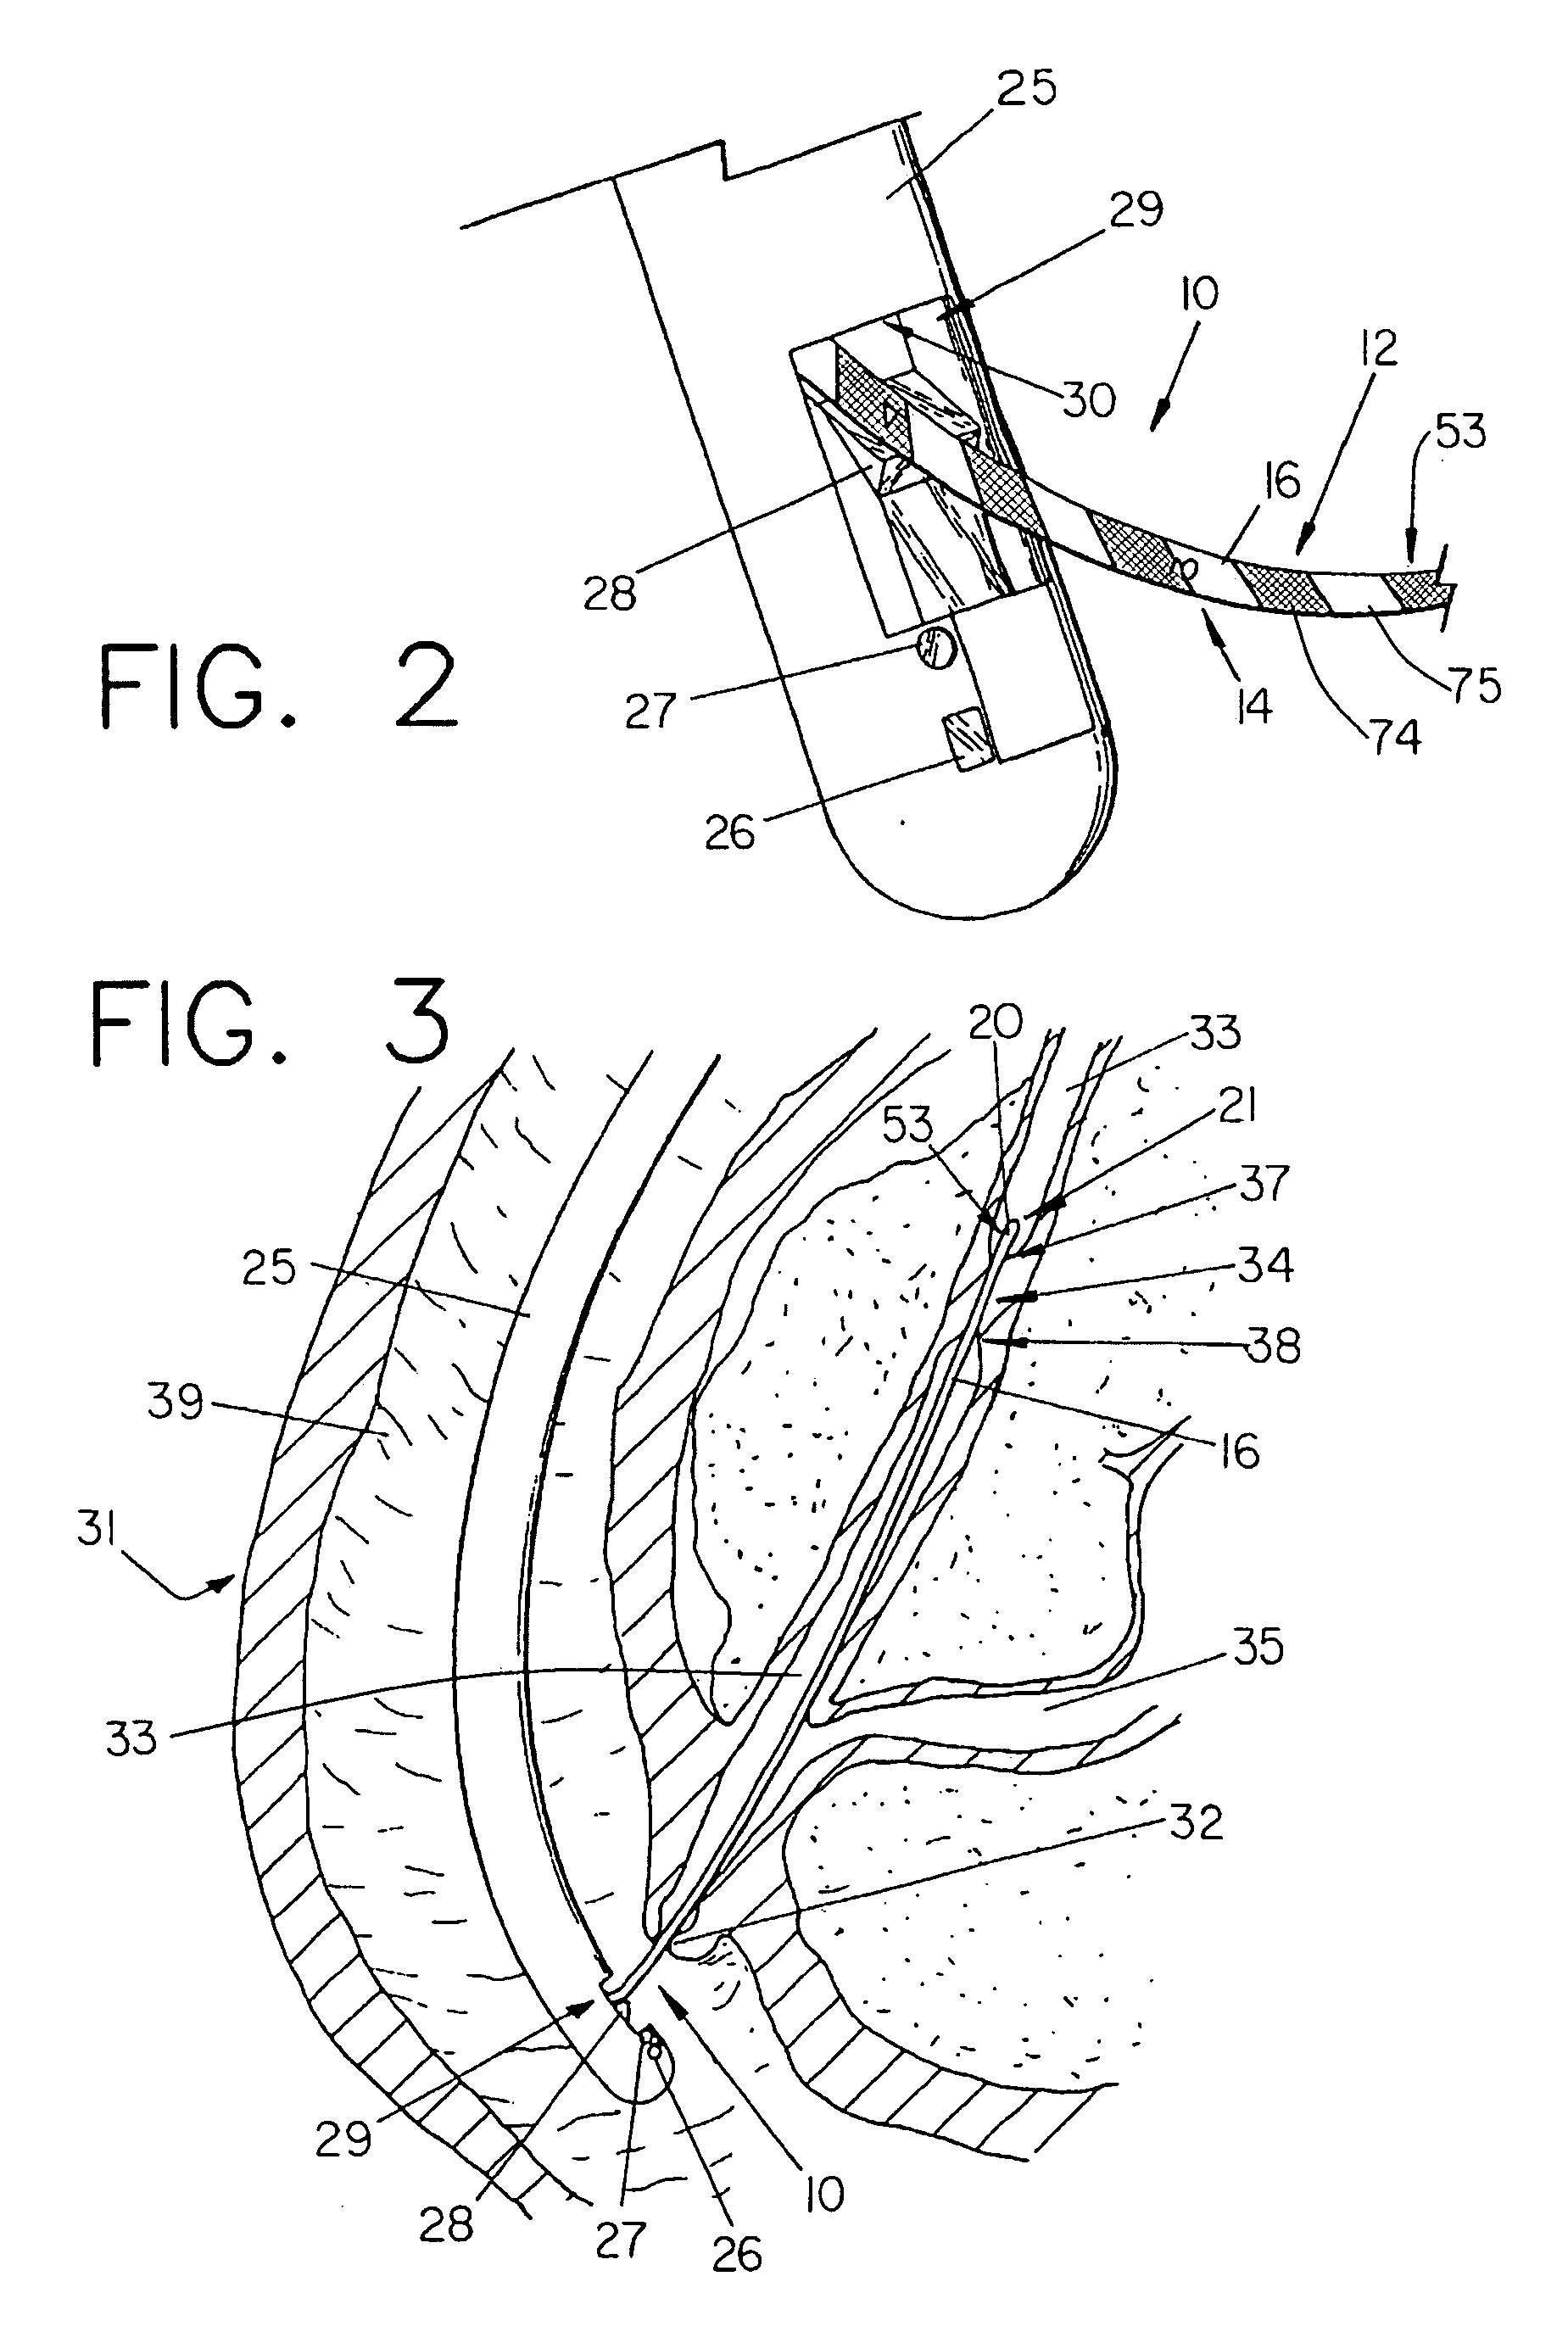 Minimally invasive medical device with helical pattern for indicating distance of movement